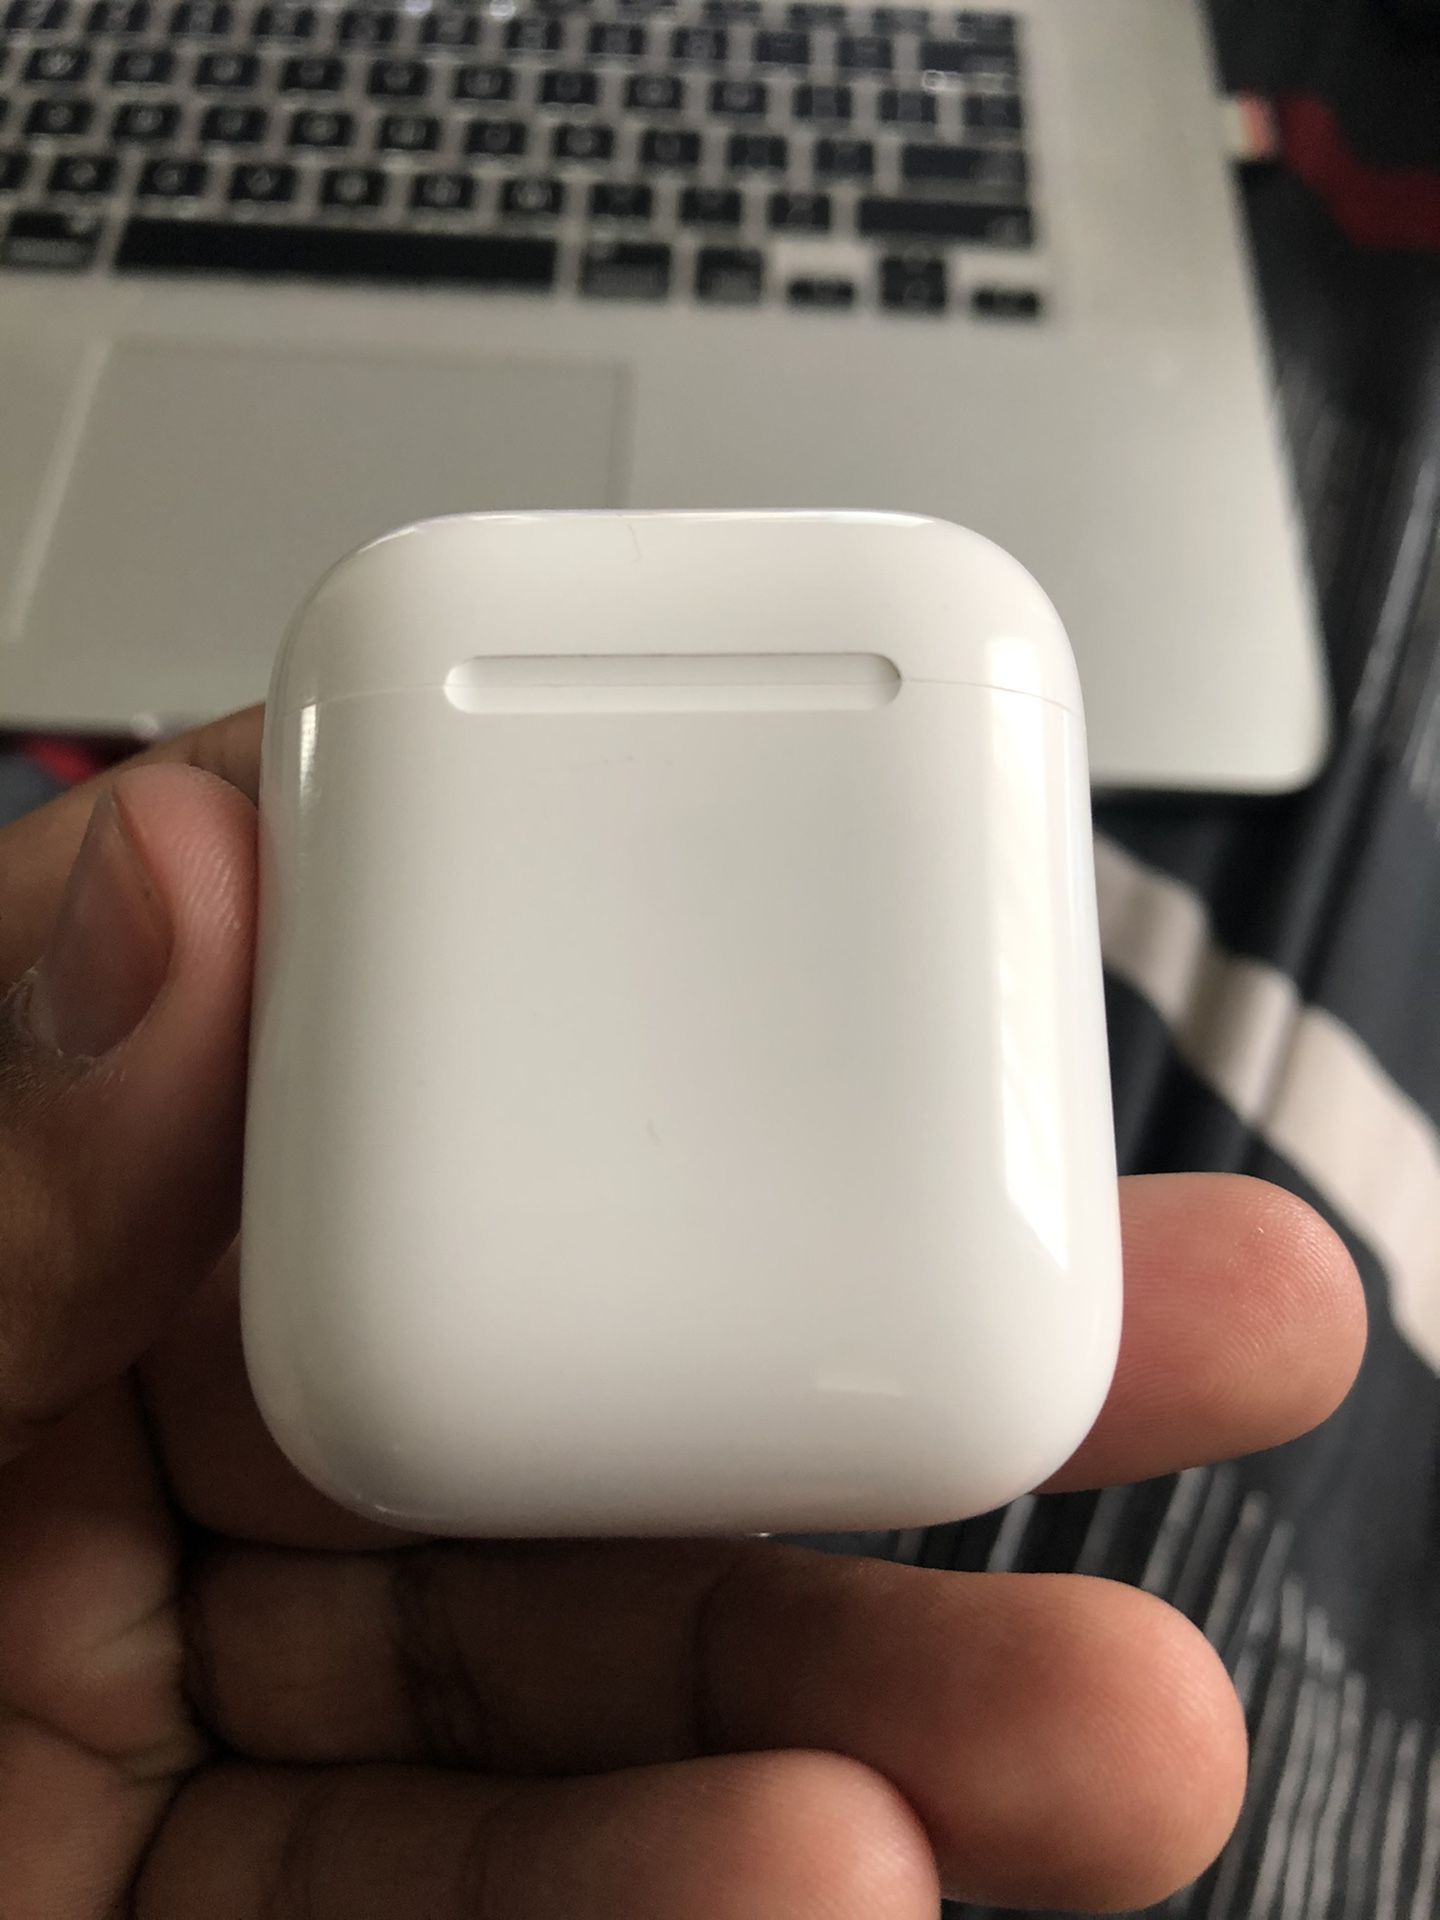 APPLE AIRPODS ALMOST BRAND NEW